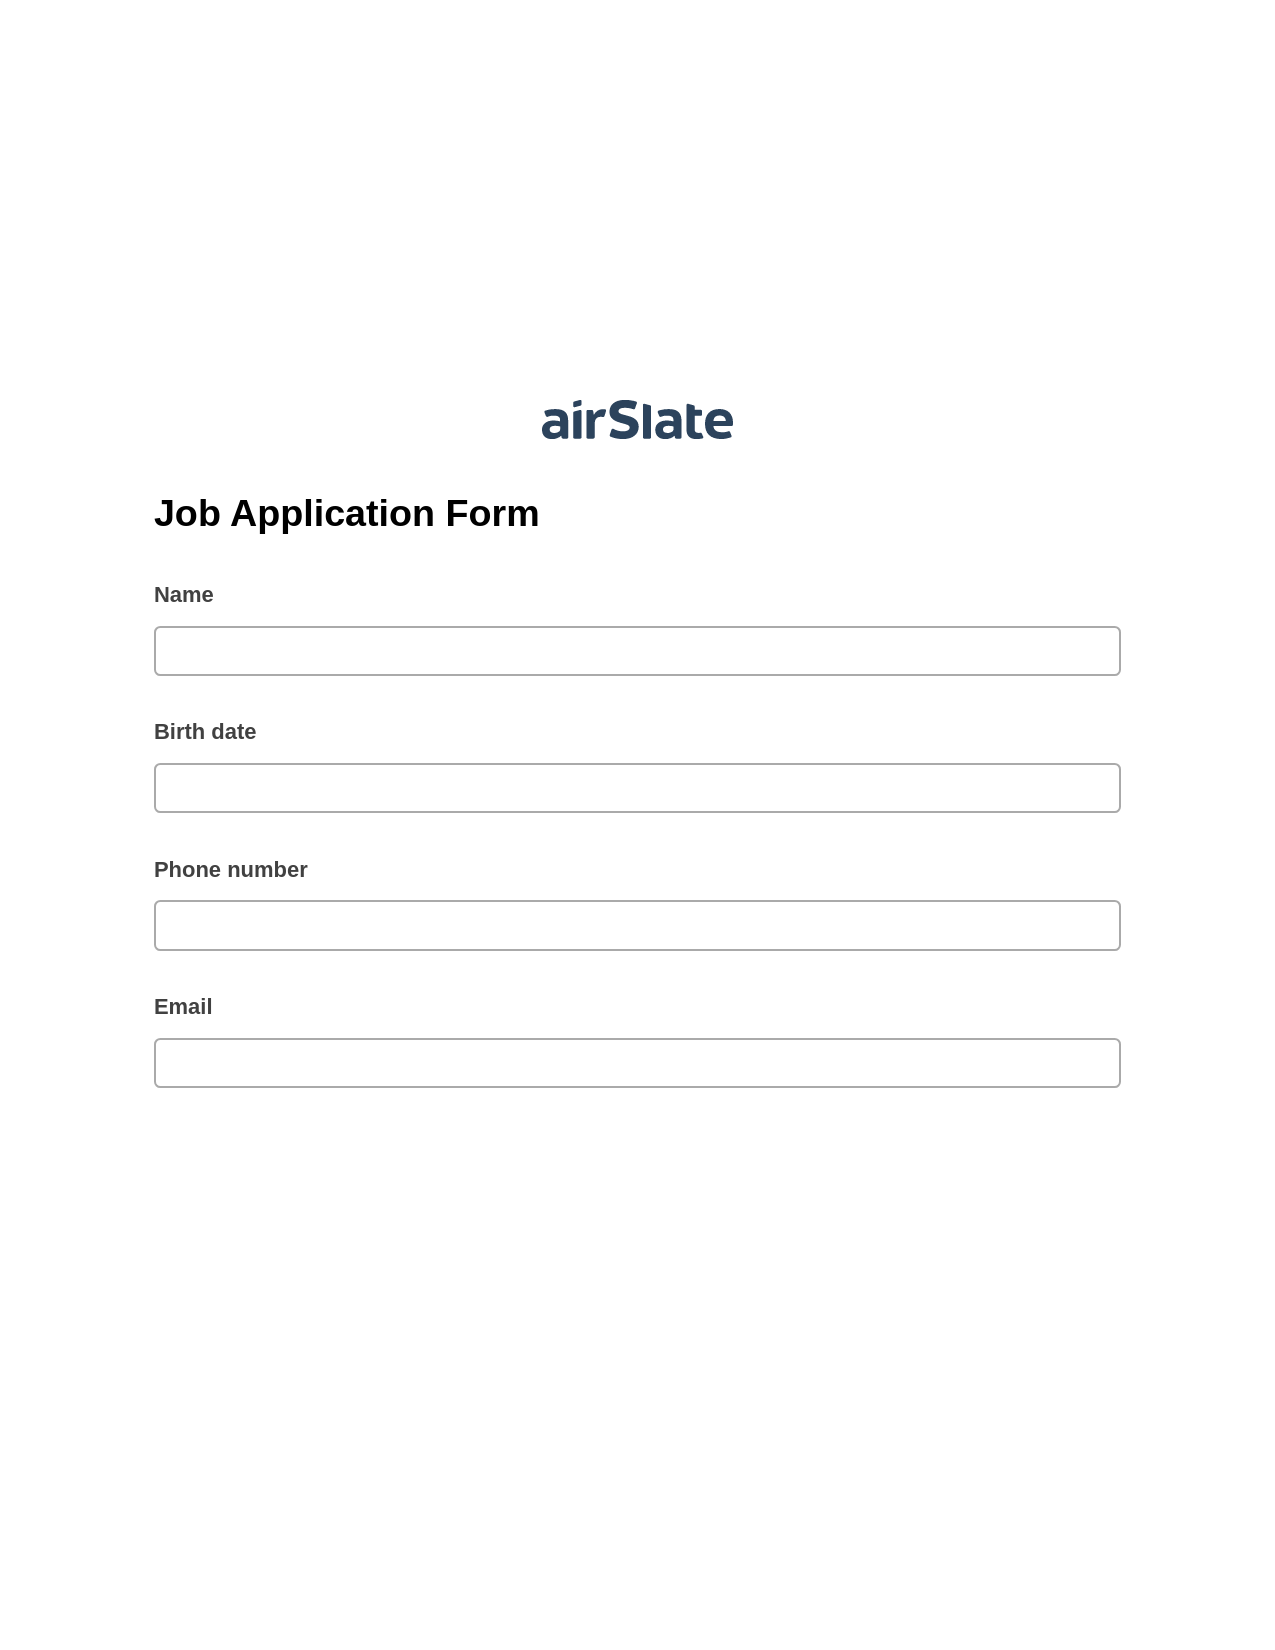 Job Application Form Pre-fill from Excel Spreadsheet Dropdown Options Bot, Create MS Dynamics 365 Records Bot, Export to Salesforce Bot